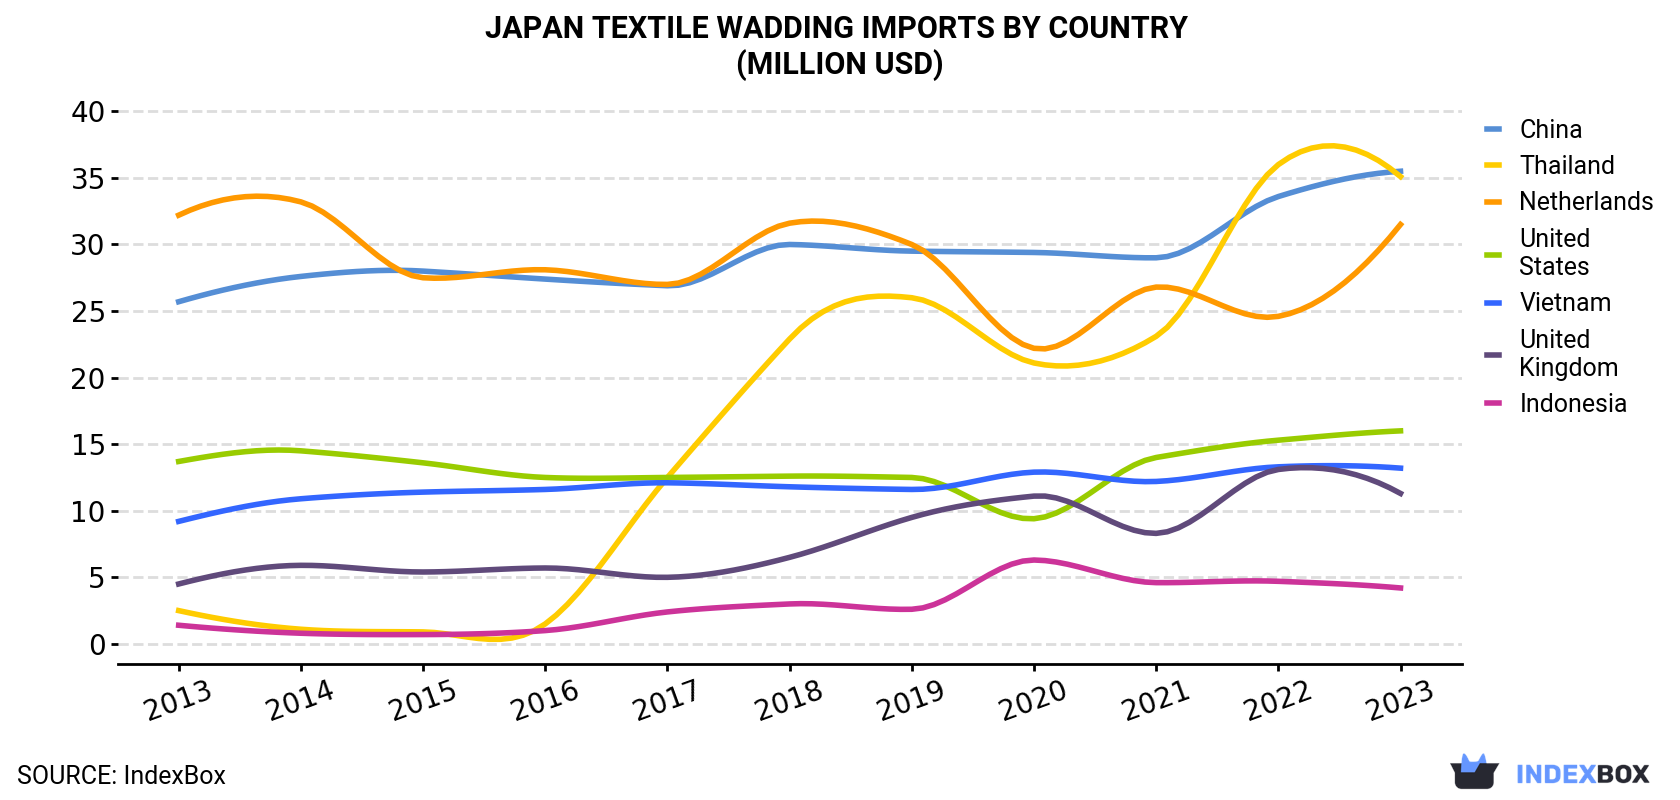 Japan Textile Wadding Imports By Country (Million USD)